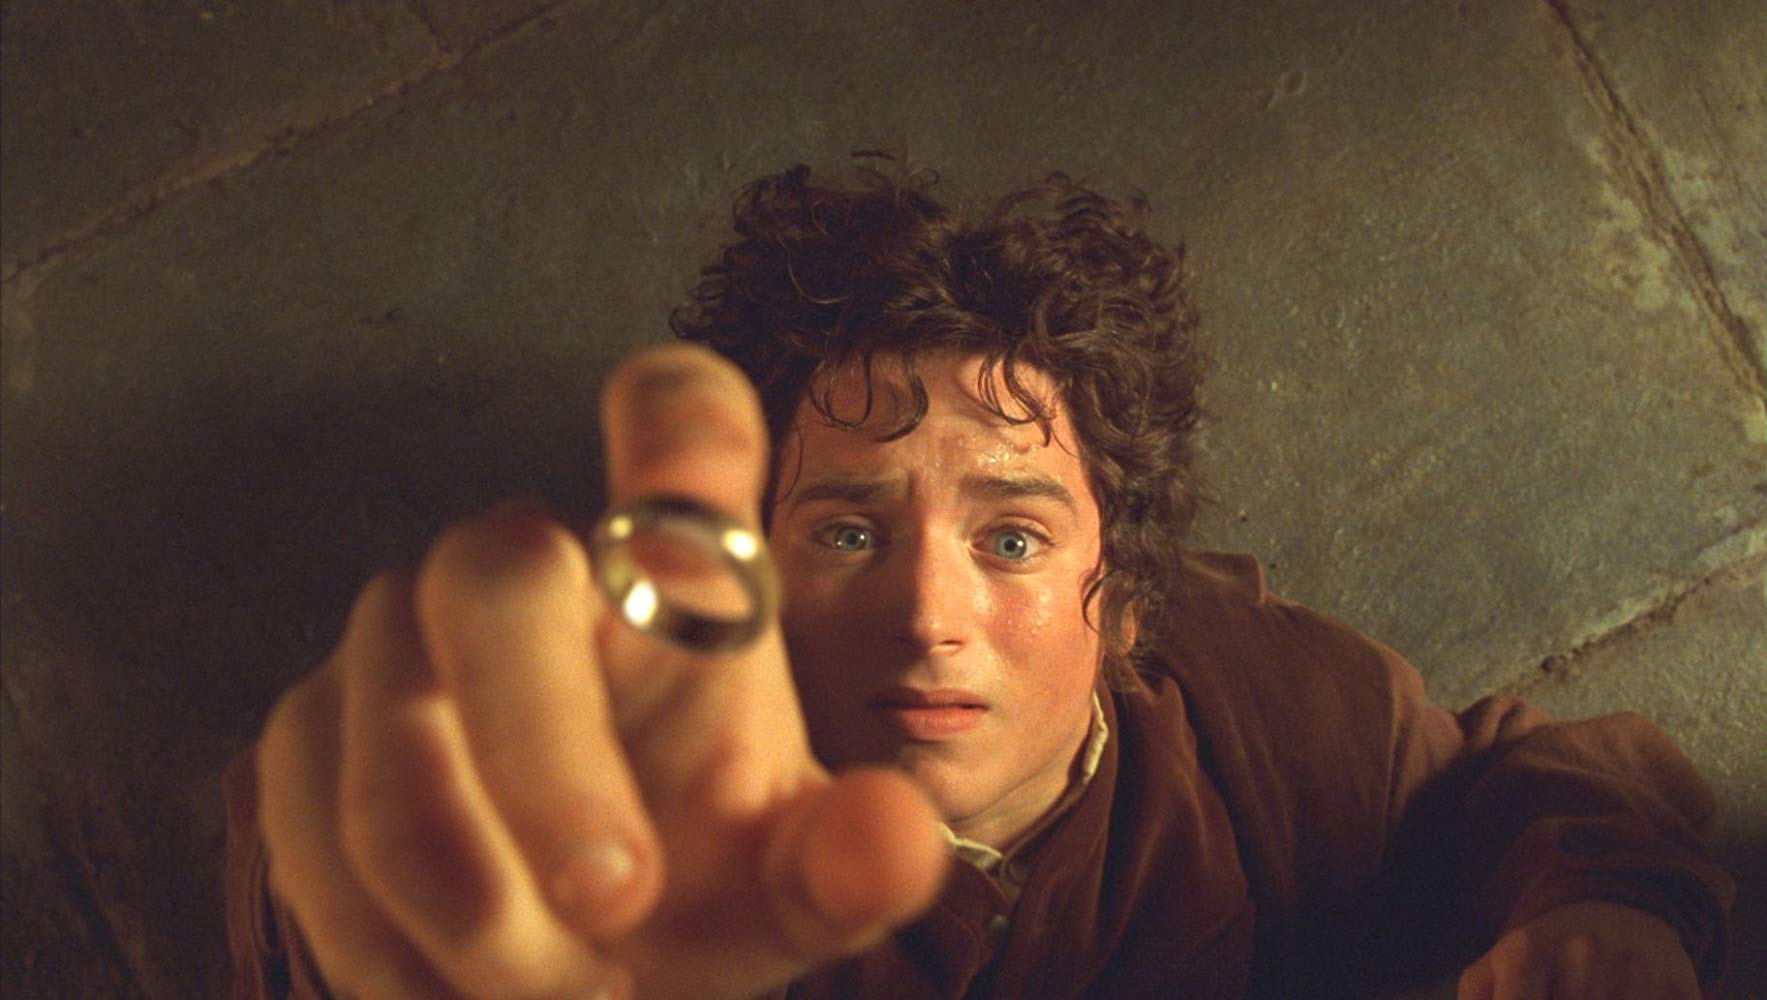 The Lord Of The Rings- The Fellowship Of The Ring (2001)